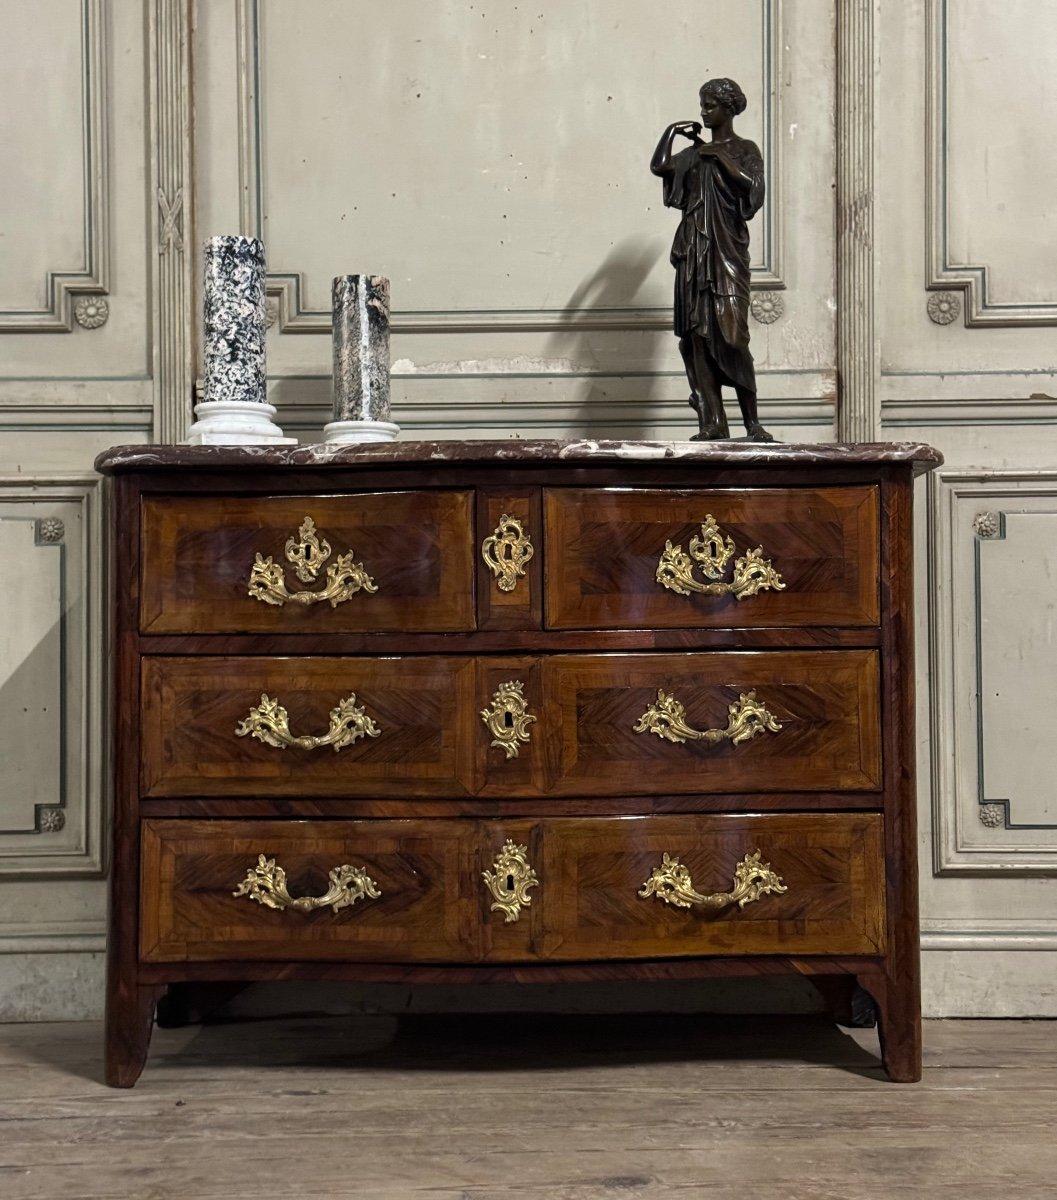 Louis XV Commode In Veneer And Gilded Bronzes, Rance Marble, 18th Century For Sale 7